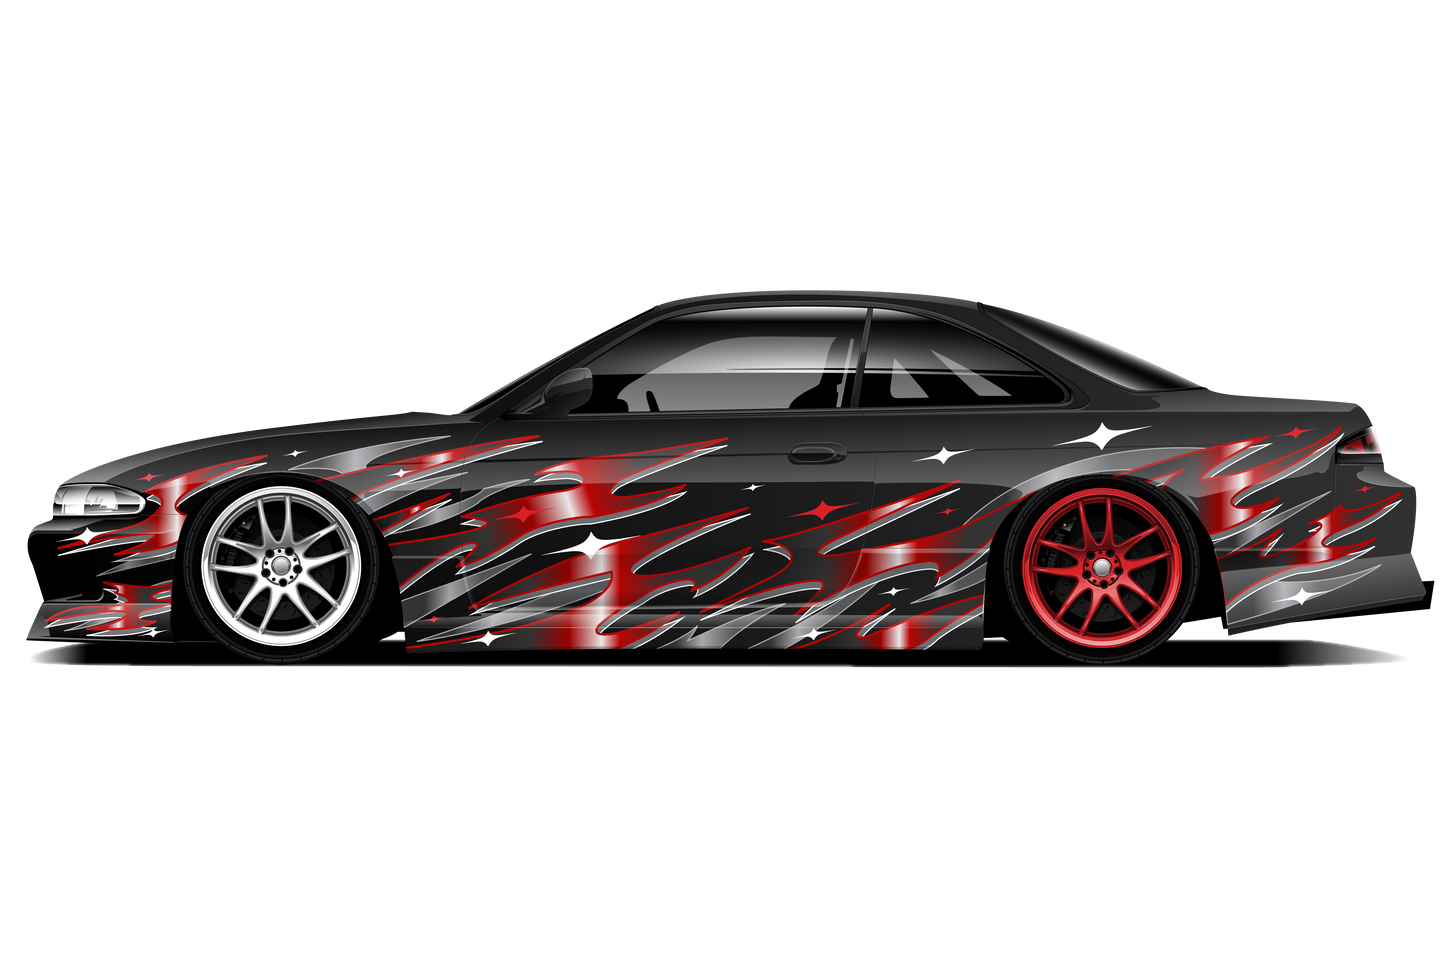 THE TSUME - RUBY - UNIVERSAL PRINTED LIVERY